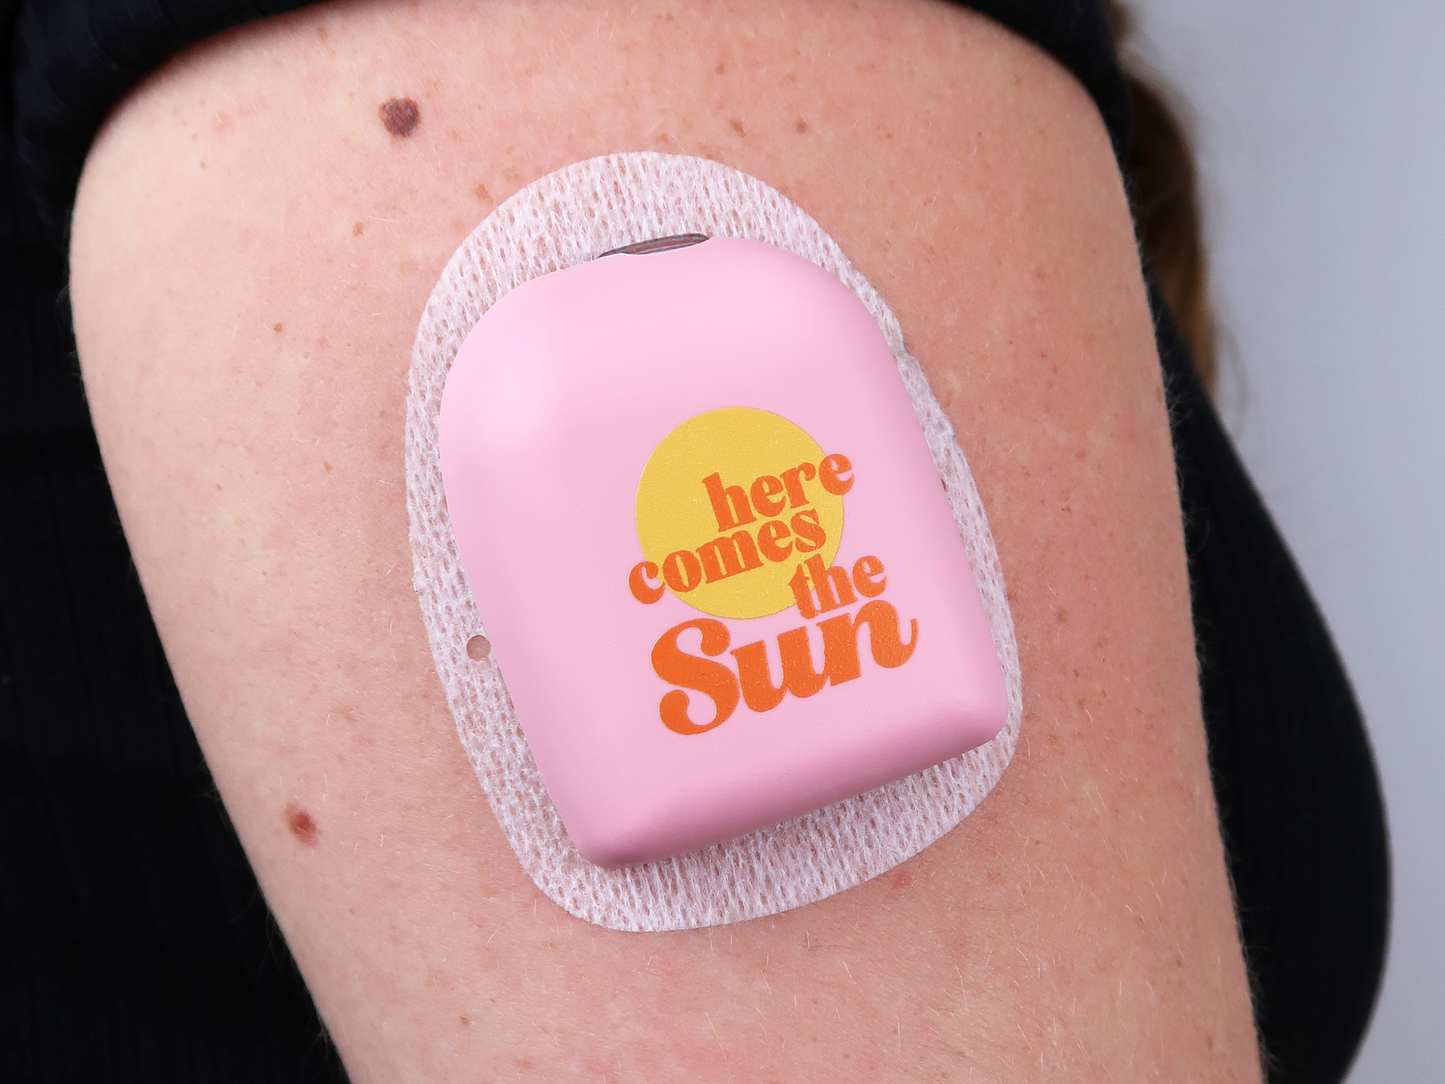 Omnipod Cover - Print - Here Comes The Sun - Light Pink